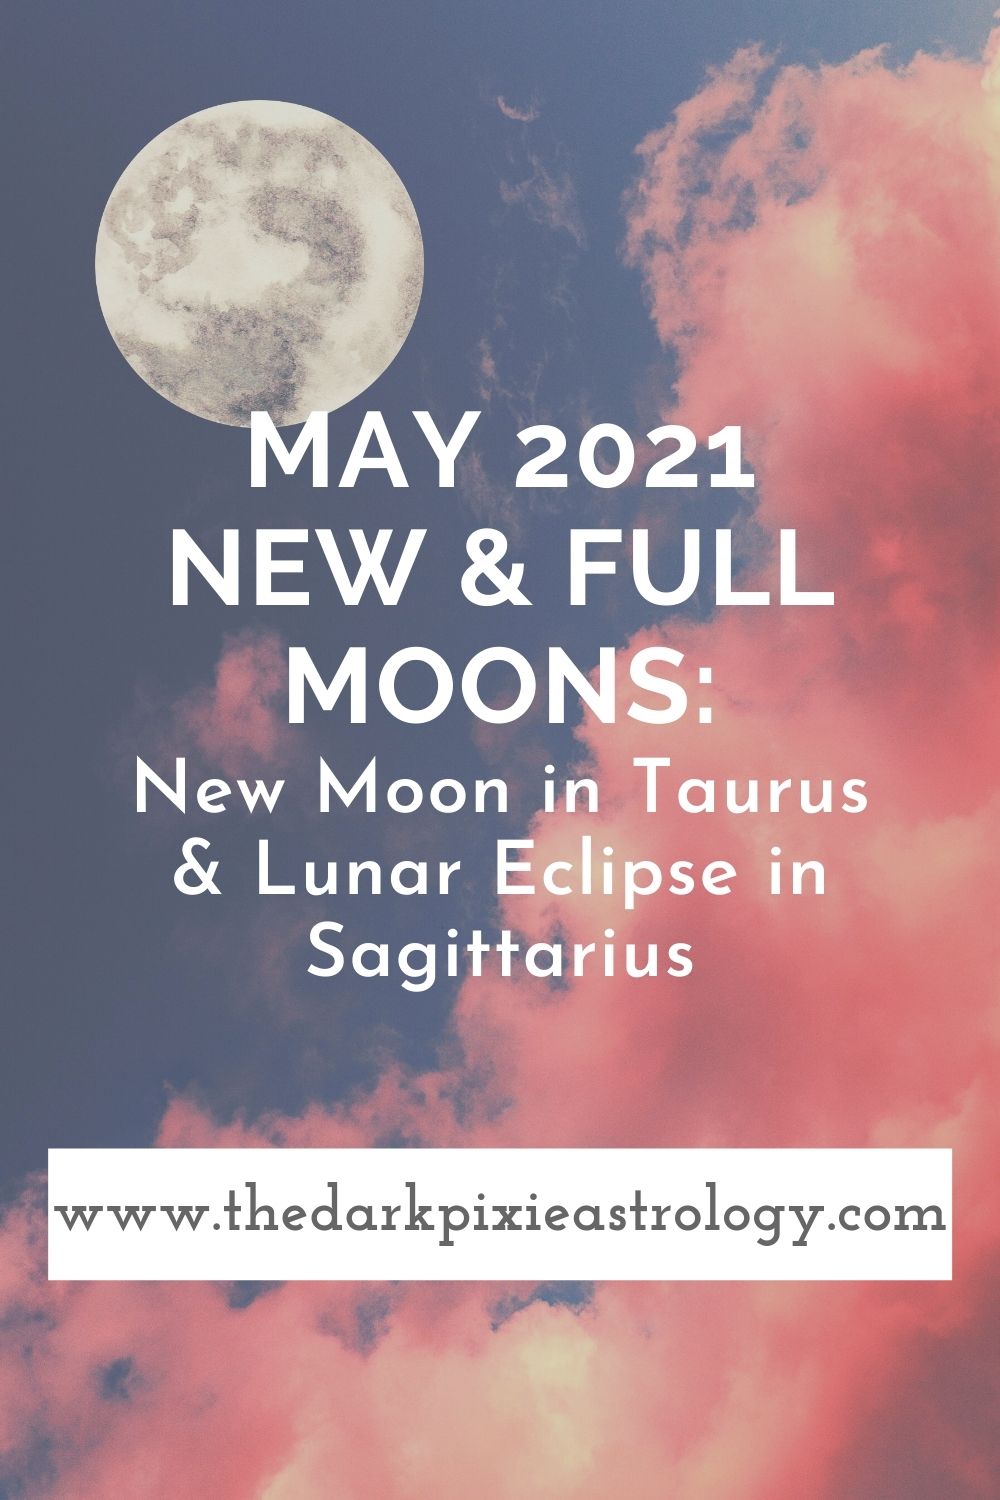 May 2021 New & Full Moons New Moon in Taurus & Lunar Eclipse in